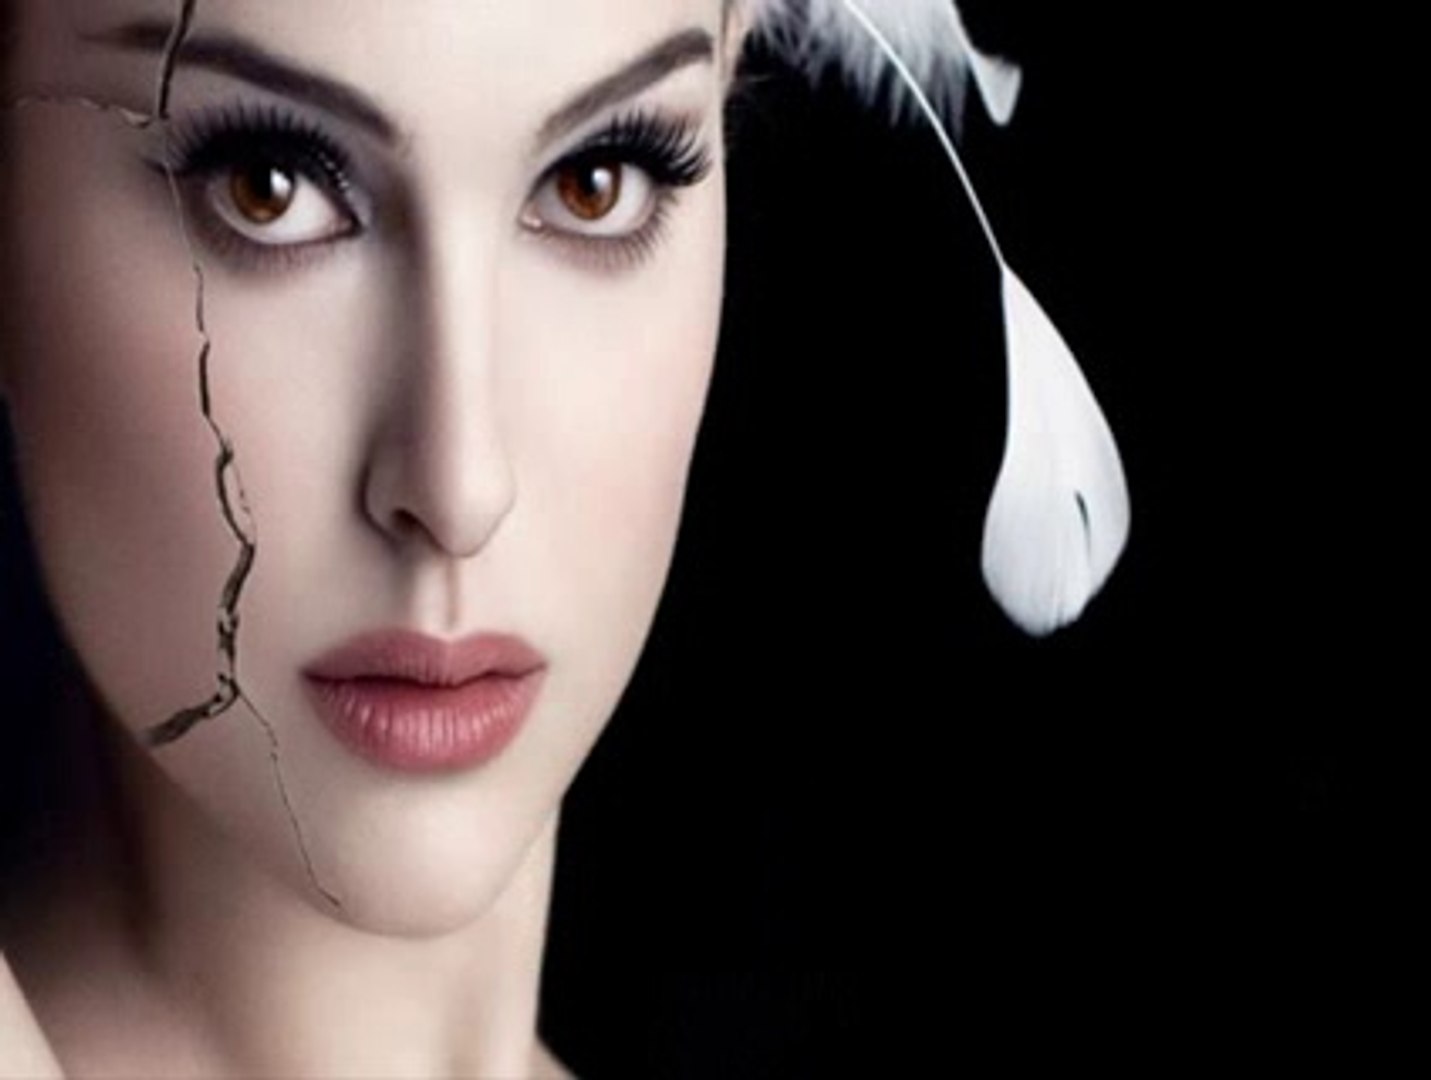 Black Swan (2010) Full Movie in ✵HD Quality✵ - video dailymotion